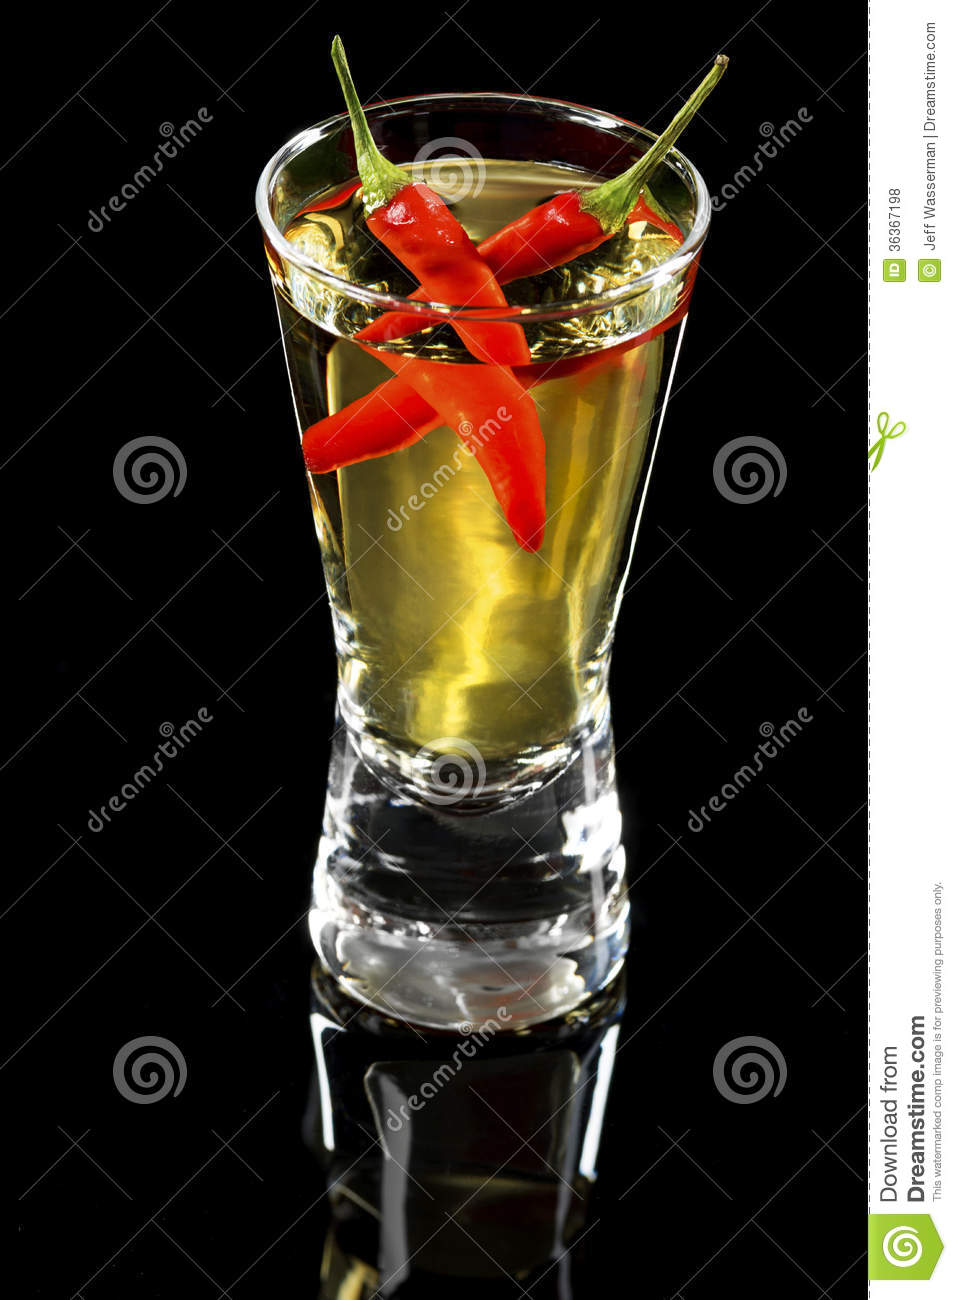 Hot Chilli Pepper Vodka Or Tequila Shooter Glass On Black Background